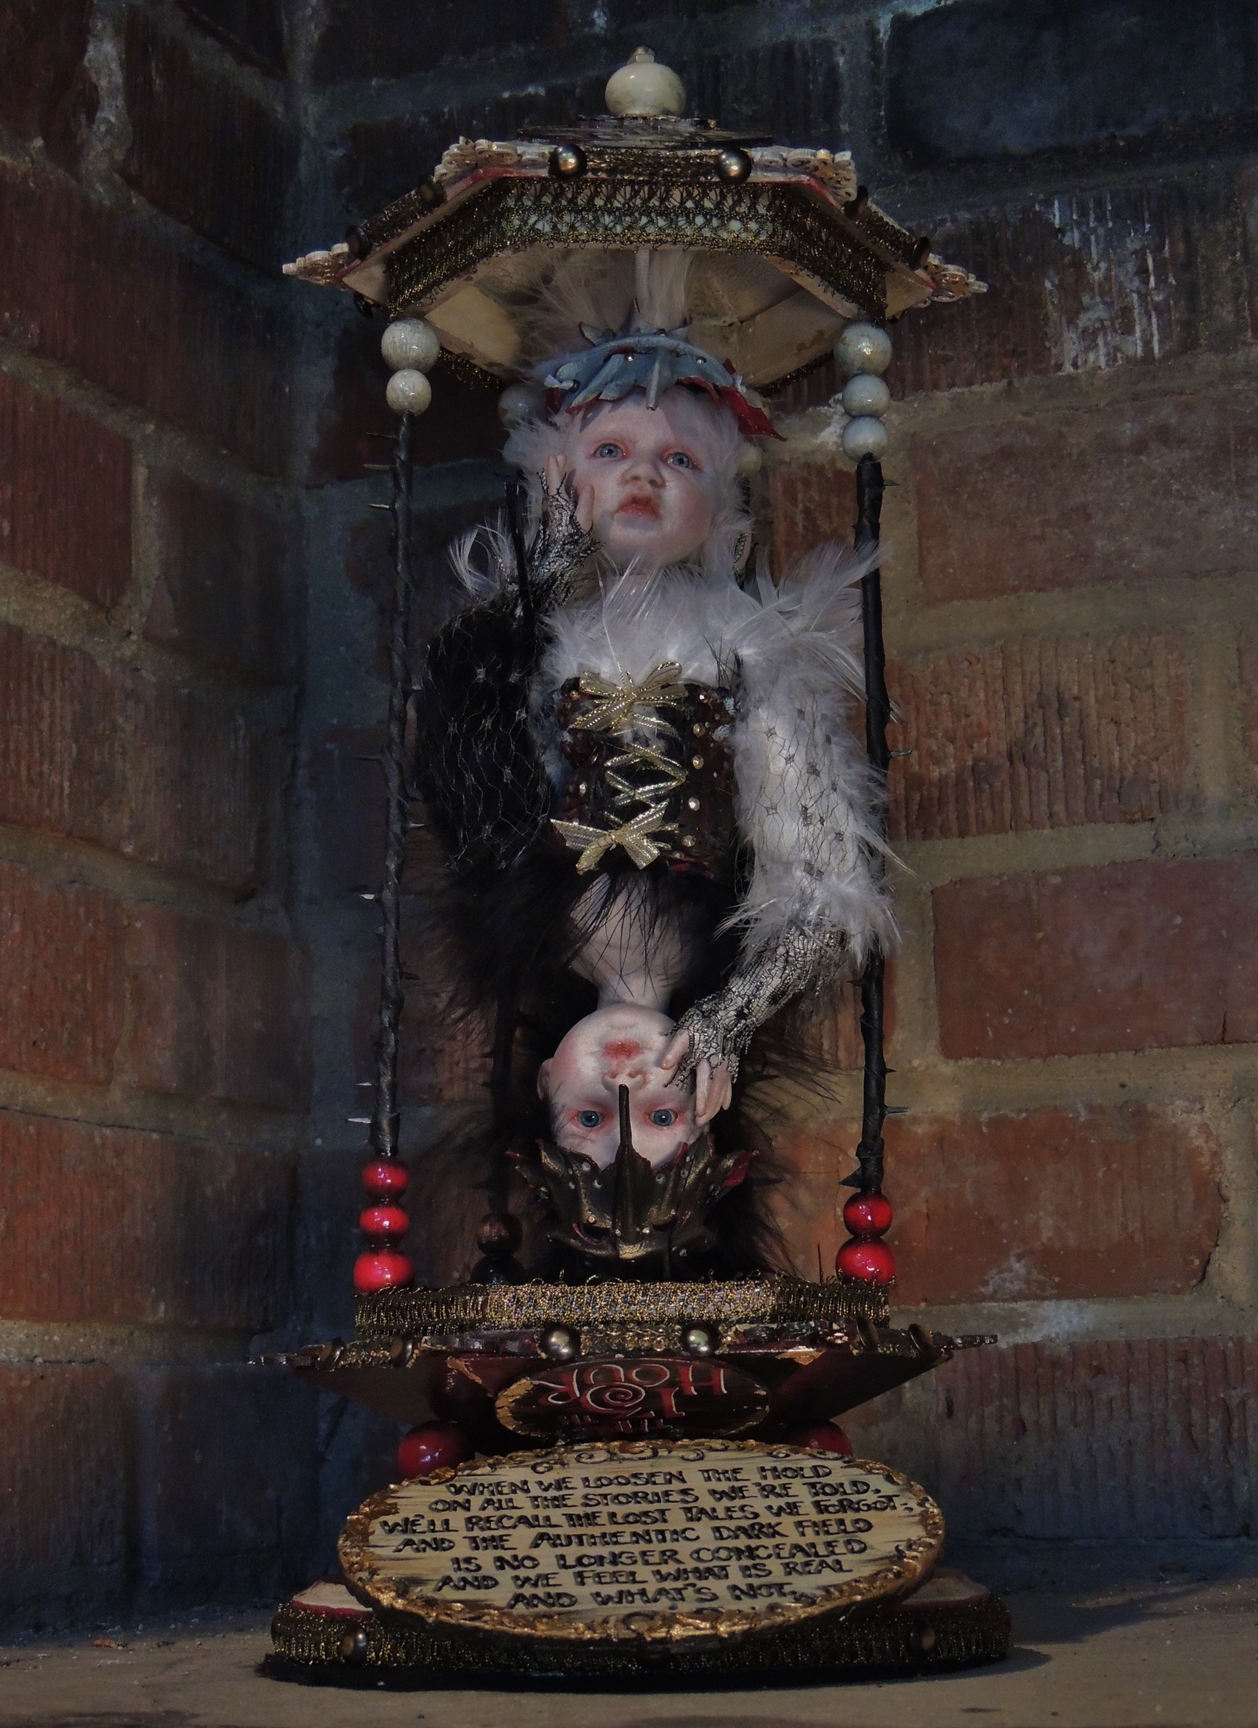 mixed media hourglass assemblage with an art doll that can be flipped to favor either the dark or light doll on top and hand painted poem on board